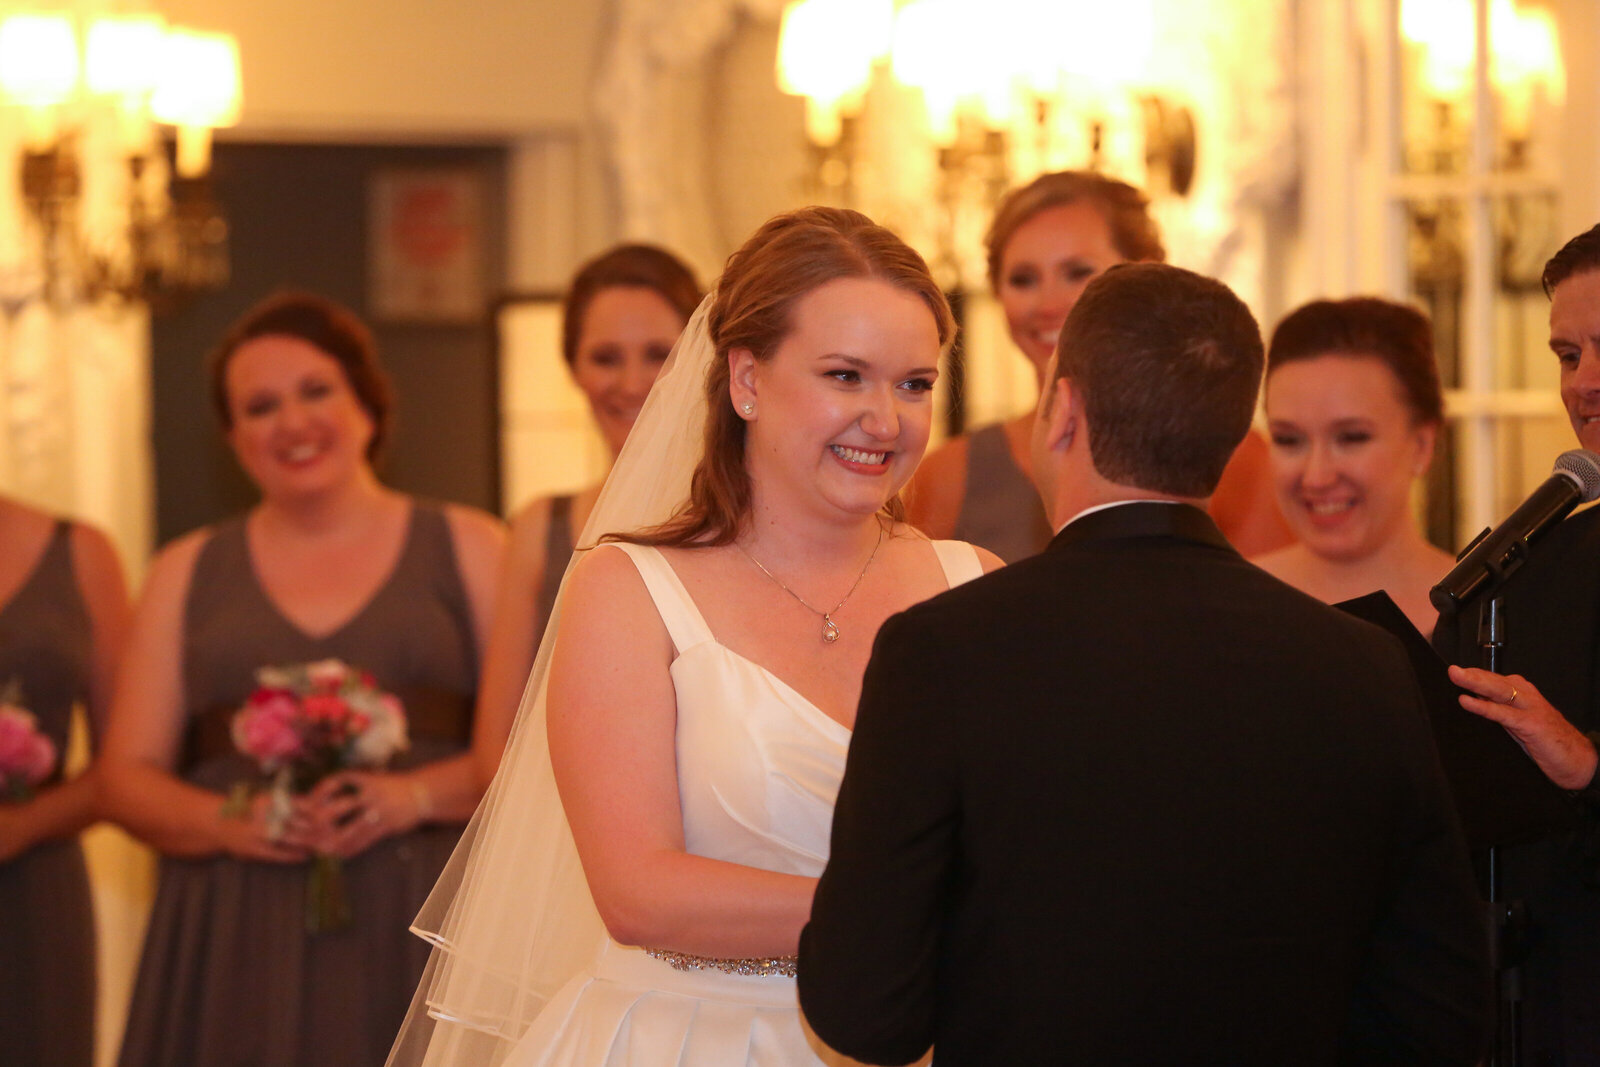 Bride smiles at her groom as she takes her vows